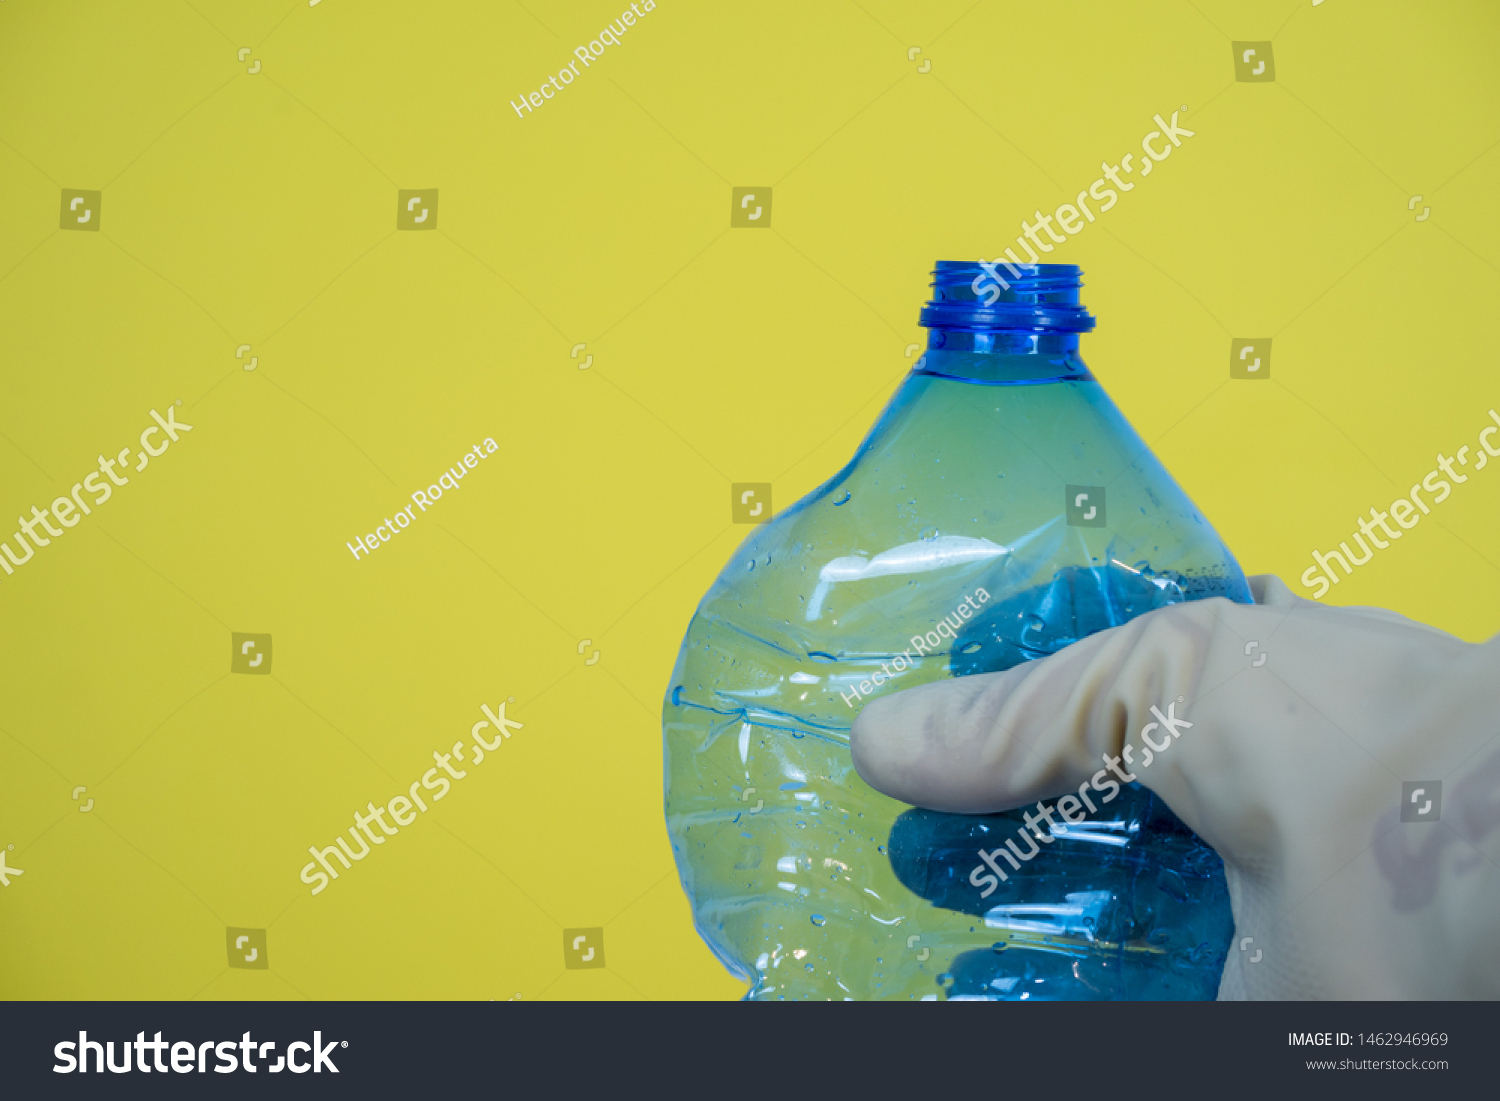 blue plastic bottle held in hand with gloves, yellow background #1462946969